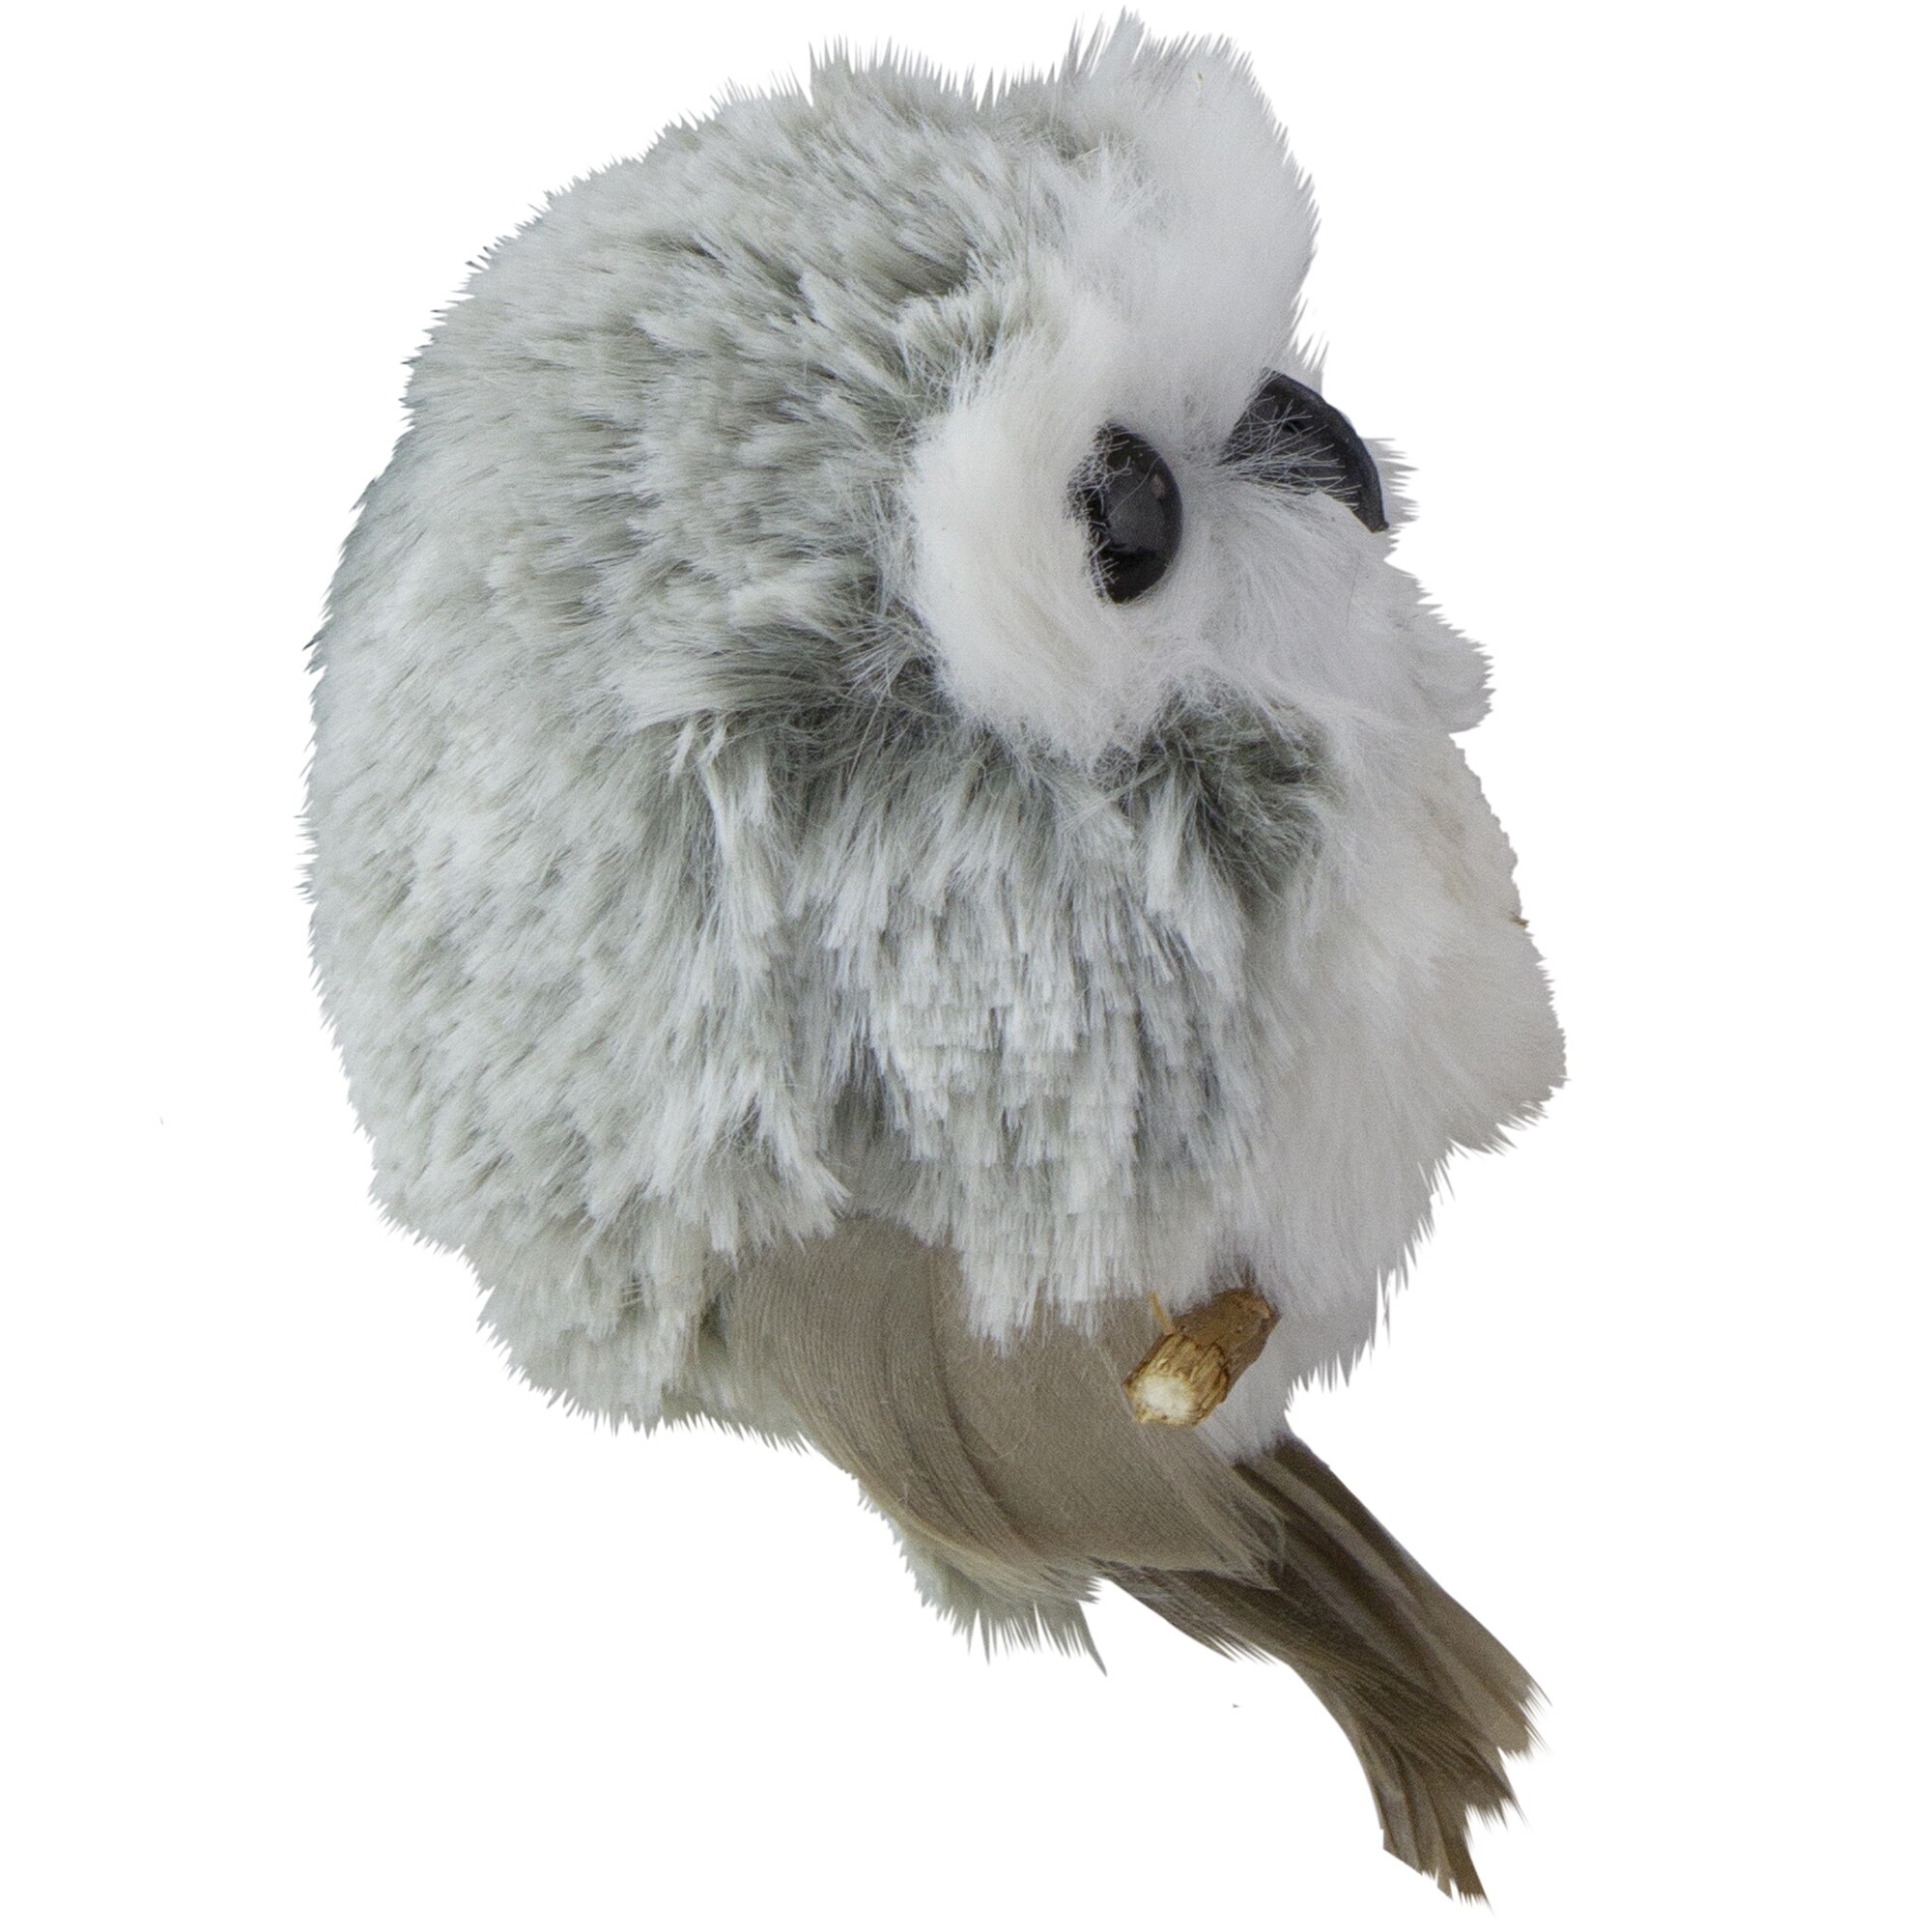 Fun White Fluff Round Baby Owl Ornament with Legs 3 3/4 your choice